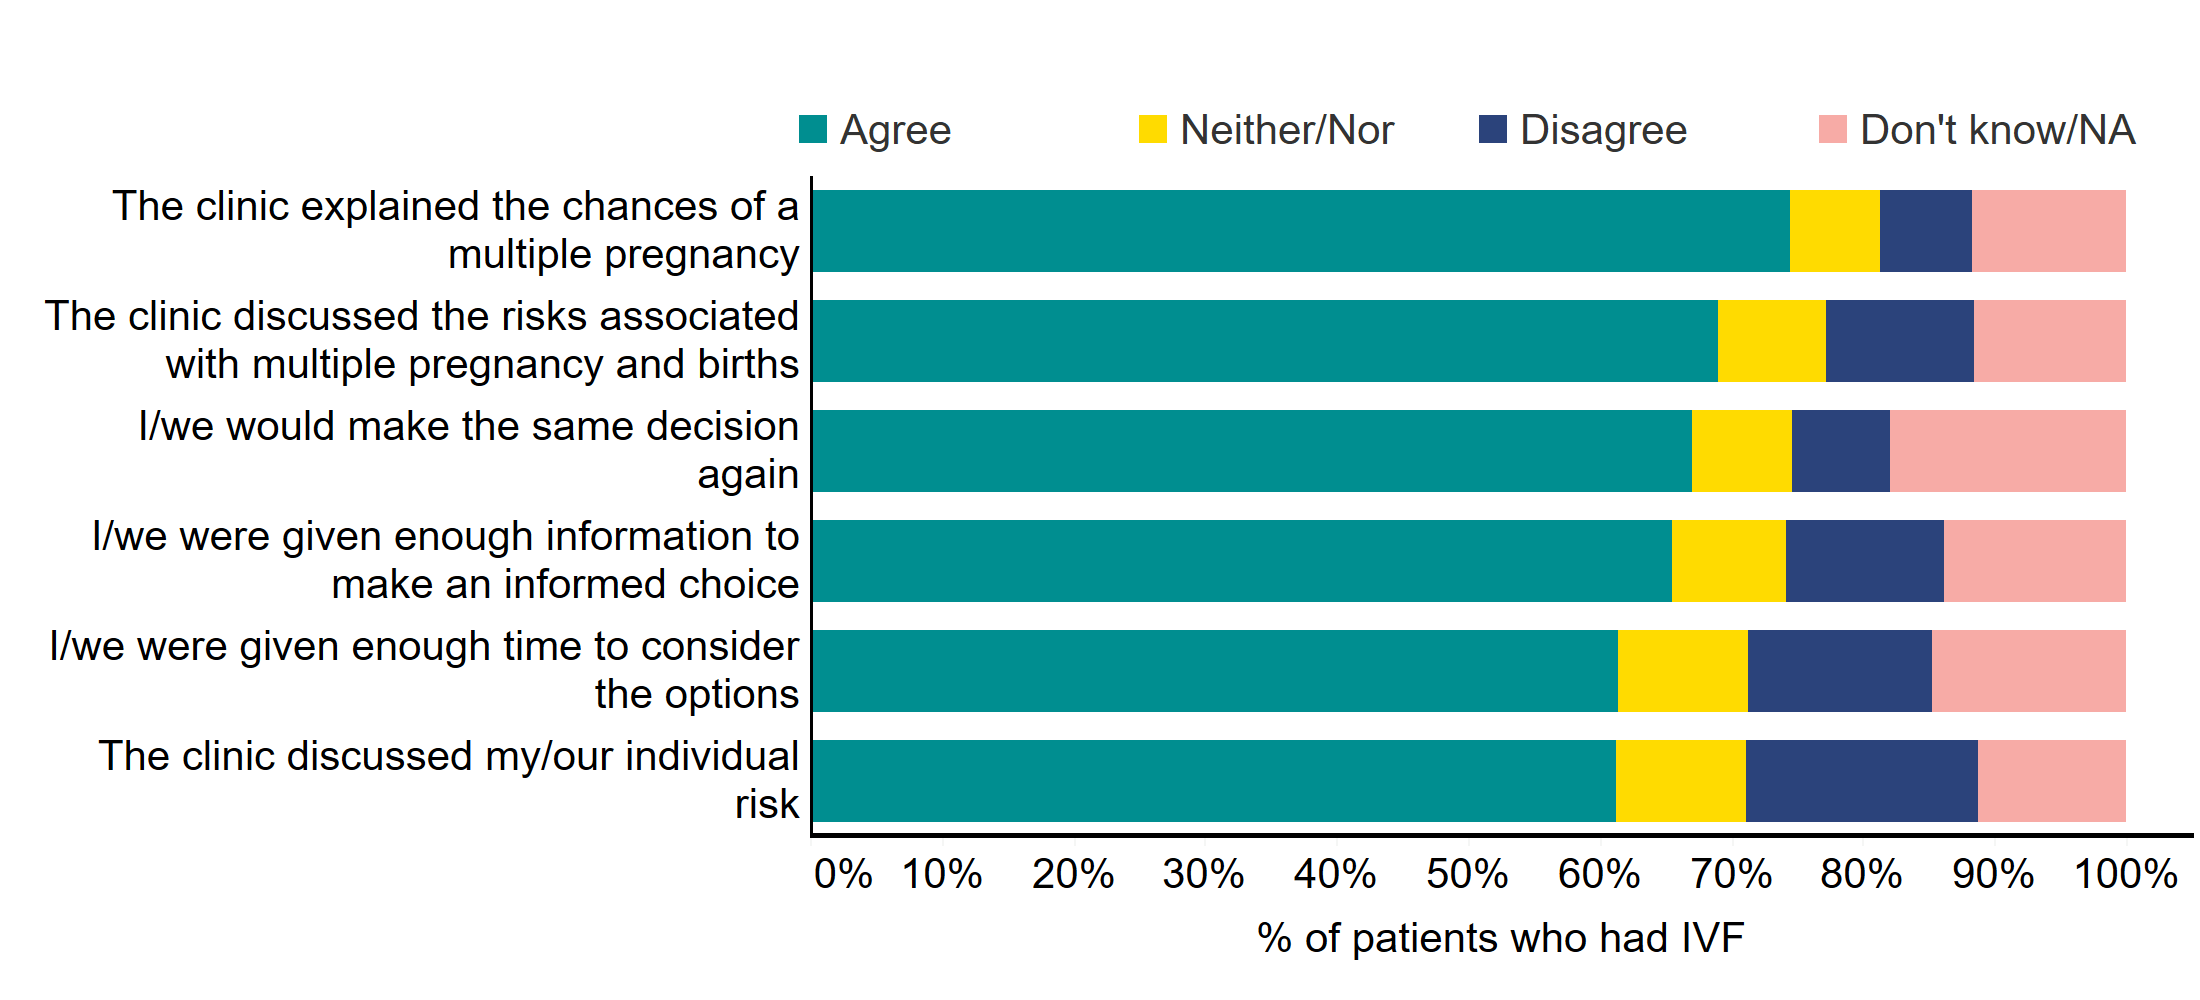 Figure 6: Statements relating to multiple embryo transfers. Statements relating to multiple embryo transfers, 2021. This stacked bar chart shows a breakdown of statements regarding risks and information about multiple embryo transfers, and whether these had been explained. Patients were most likely to agree that their clinic had explained the chances of multiple pregnancy (75%). They were least likely to agree that they were given enough time to consider (61%), and the clinic discussed their individual risk (61%). An accessible form of the underlying data for this figure can be downloaded at the start of the report in .xls format.